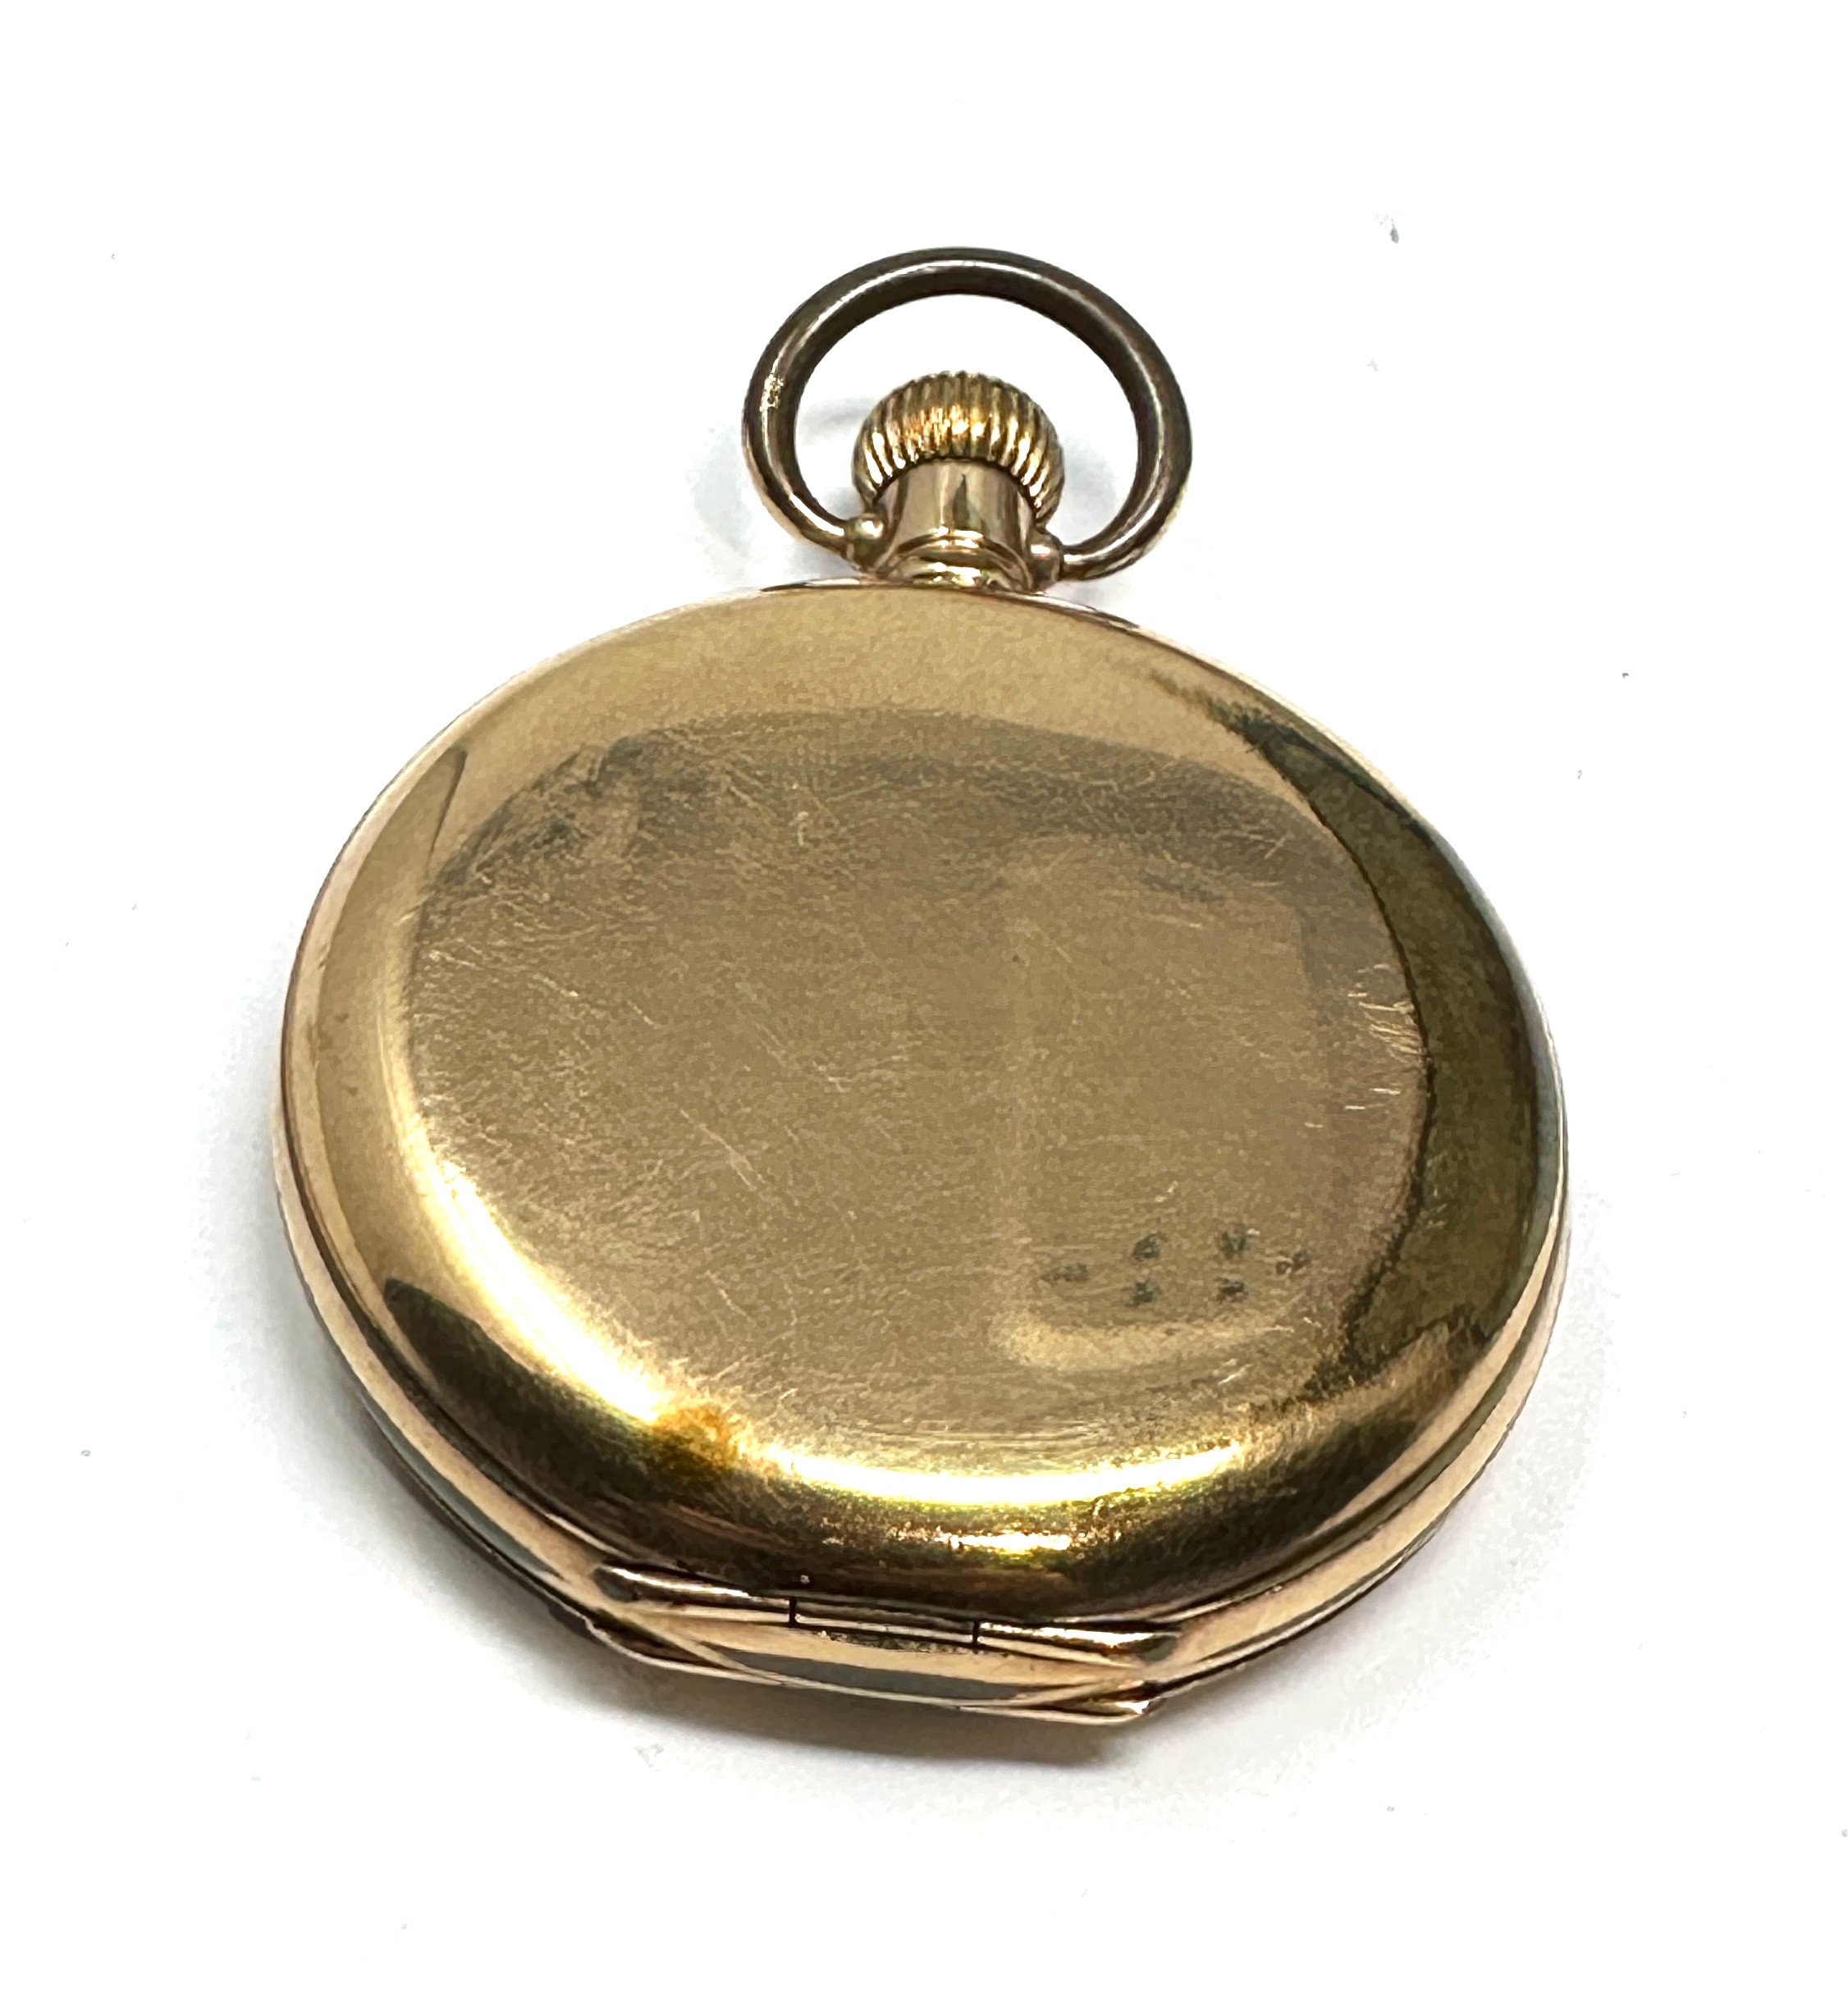 Antique gold plated full hunter waltham traveller pocket watch the watch is not ticking - Image 2 of 3